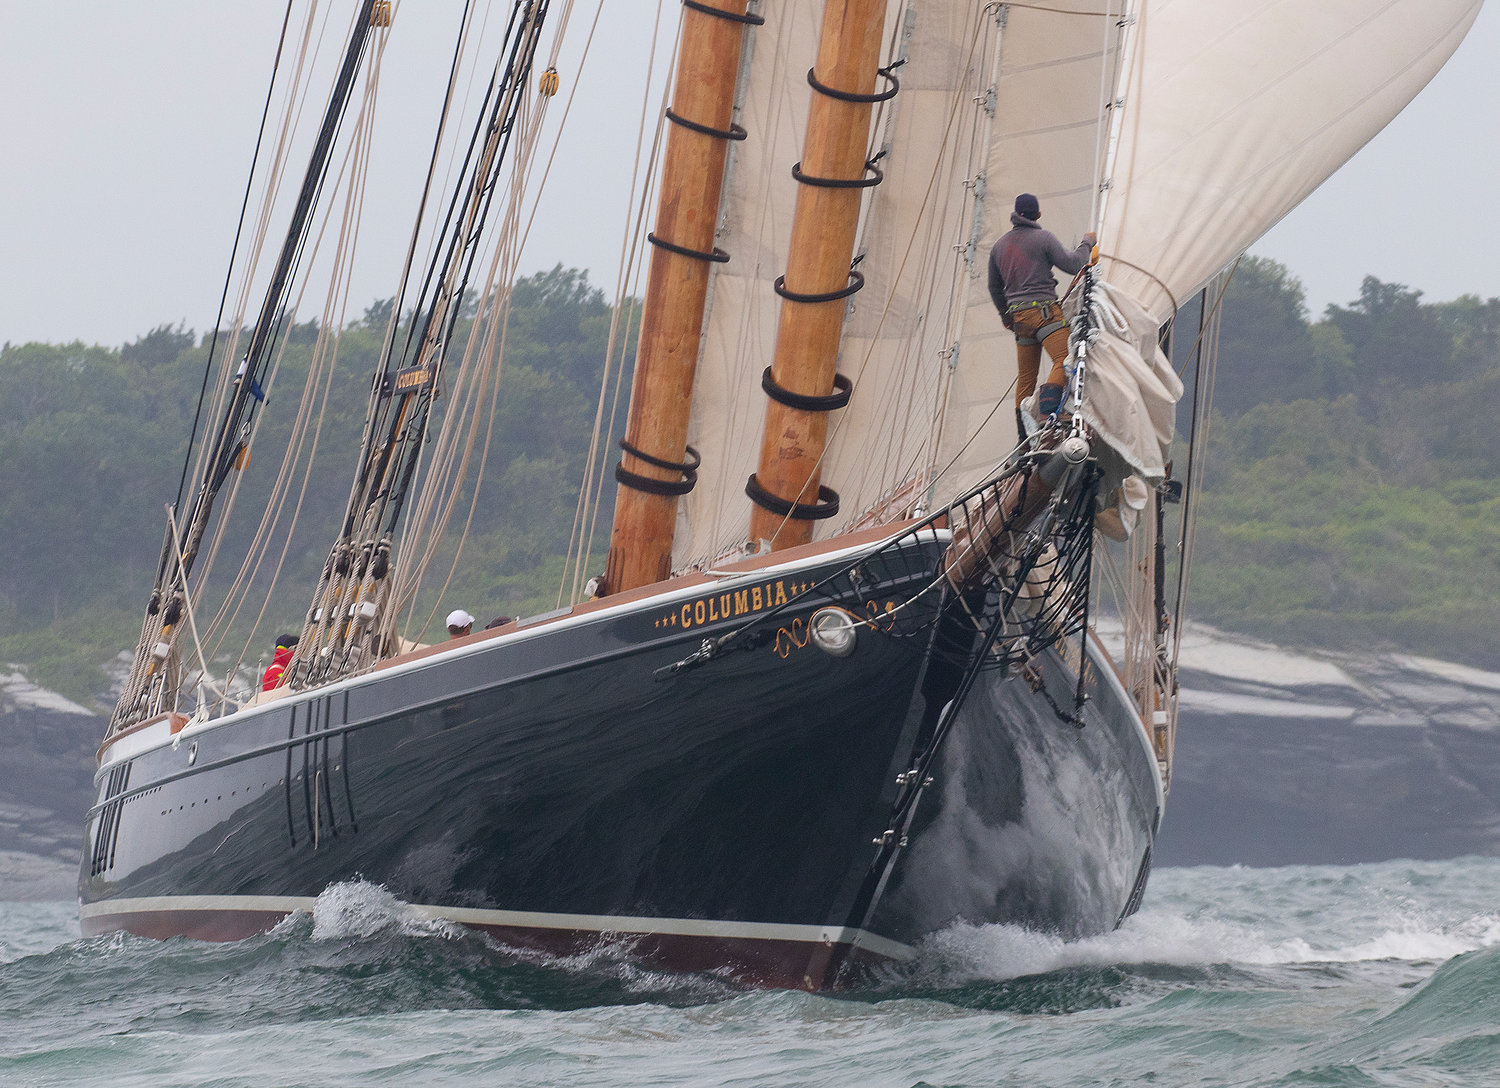 Columbia, a Herreshoff racing schooner owned by Martin Sutter of the CCA and NYYC, preps for the start of the Newport Bermuda Race on Friday, June 17, in Newport Harbor.